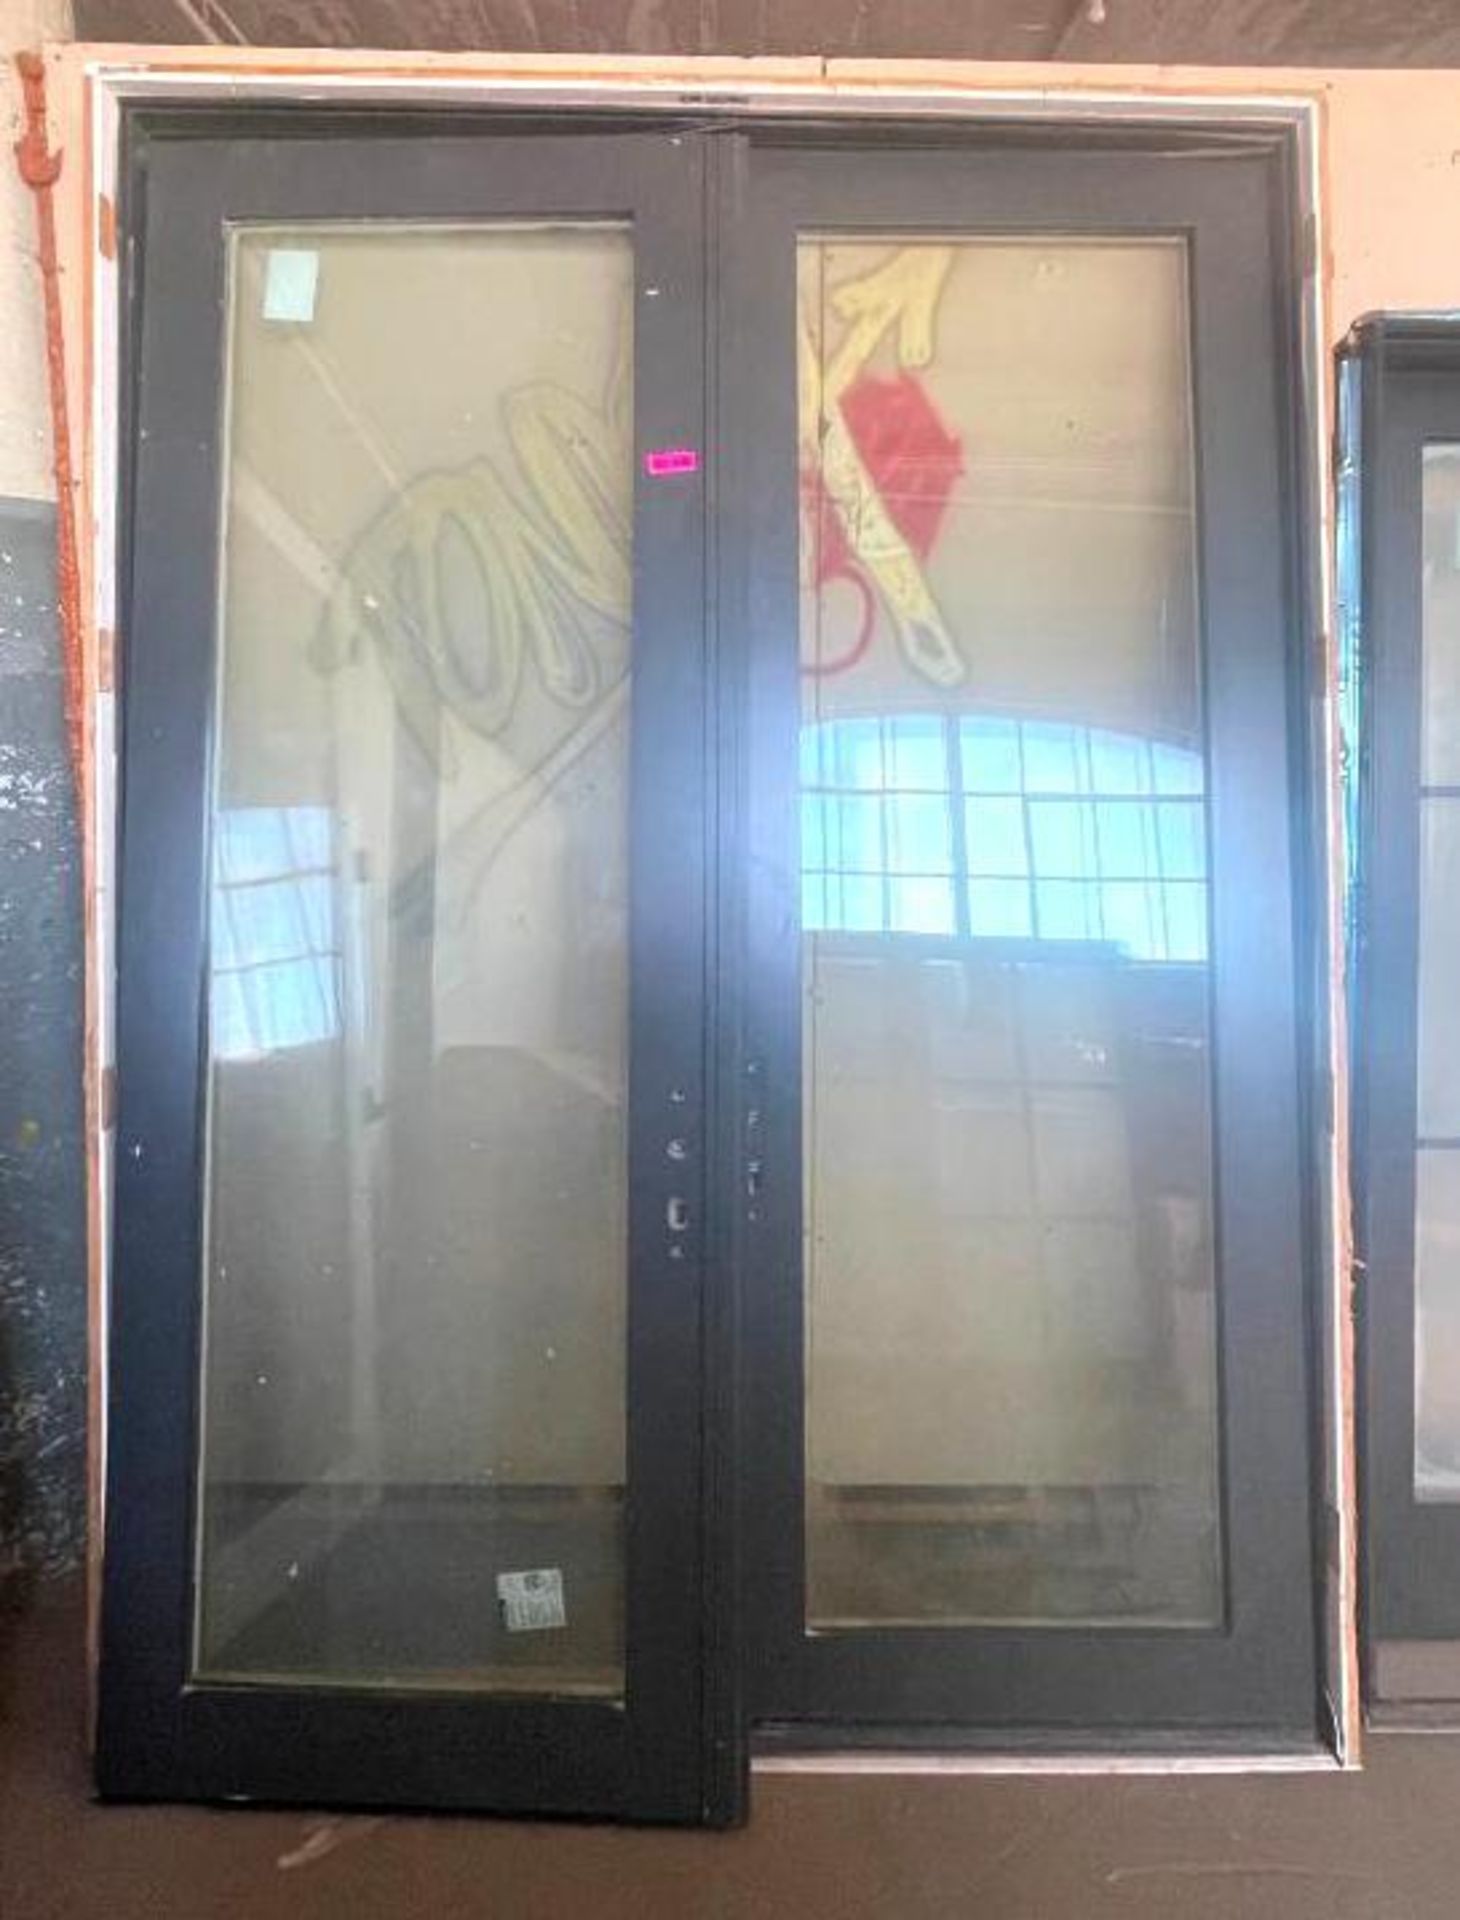 72" X 96" COMMERCIAL GLASS DOOR W/ FRAME BRAND/MODEL: PELLA SIZE: 72" X 96" LOCATION ROOM 1 QTY: 1 - Image 2 of 7